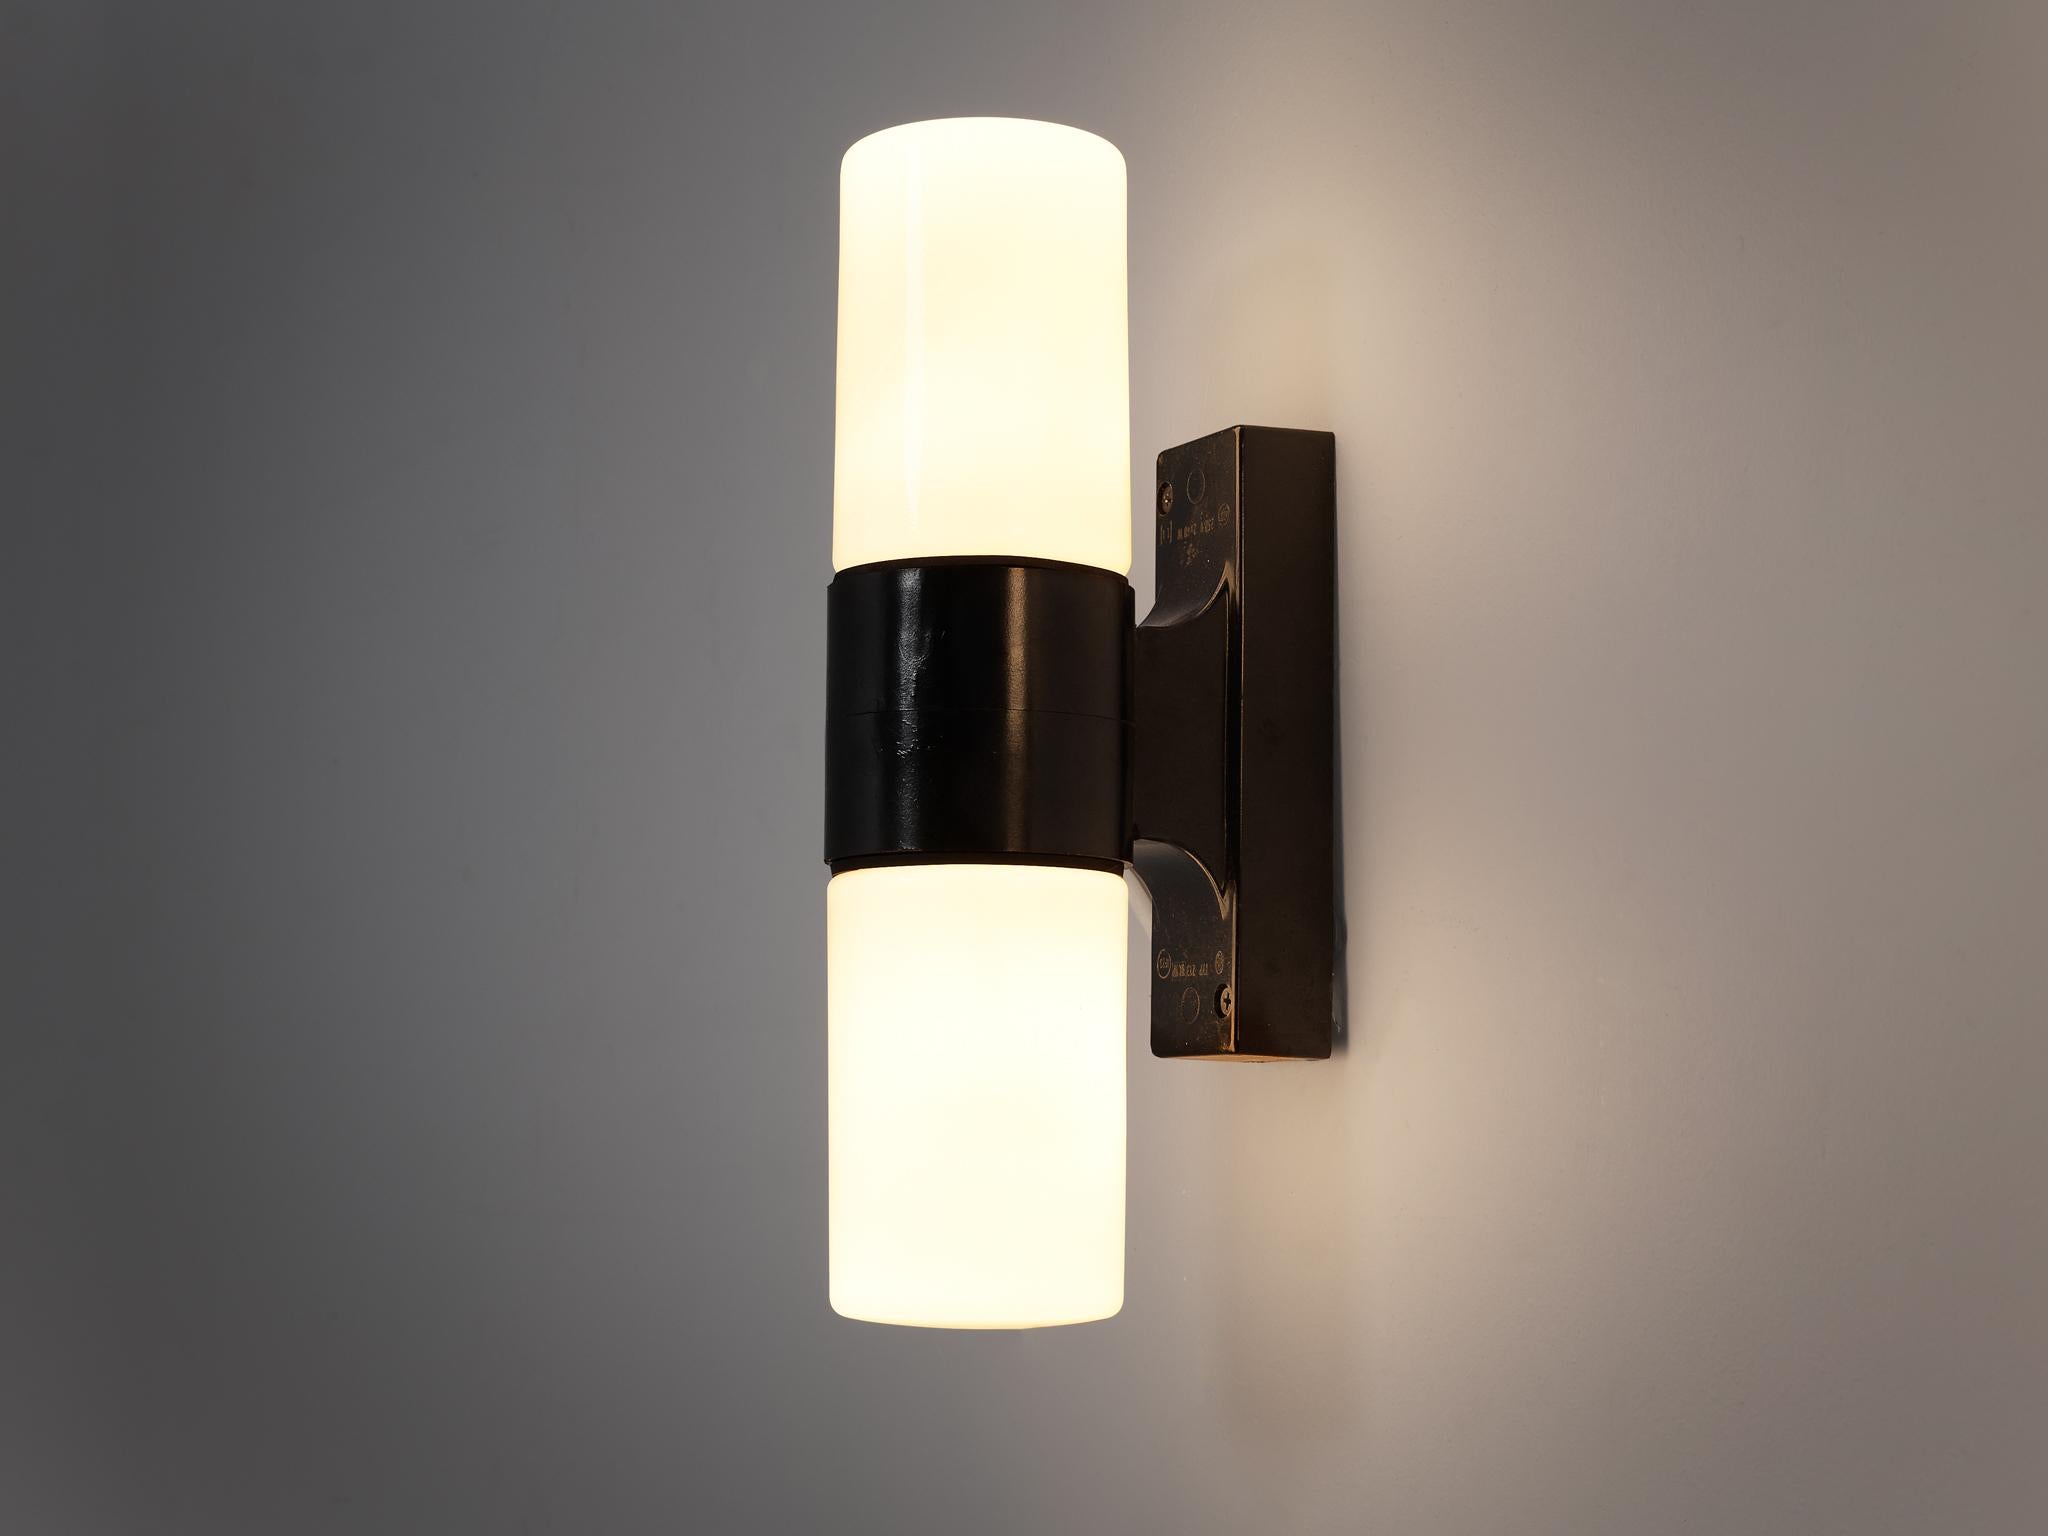 Mid-20th Century Bauhaus Inspired Wall Lights in Black Bakelite and Opaline Glass